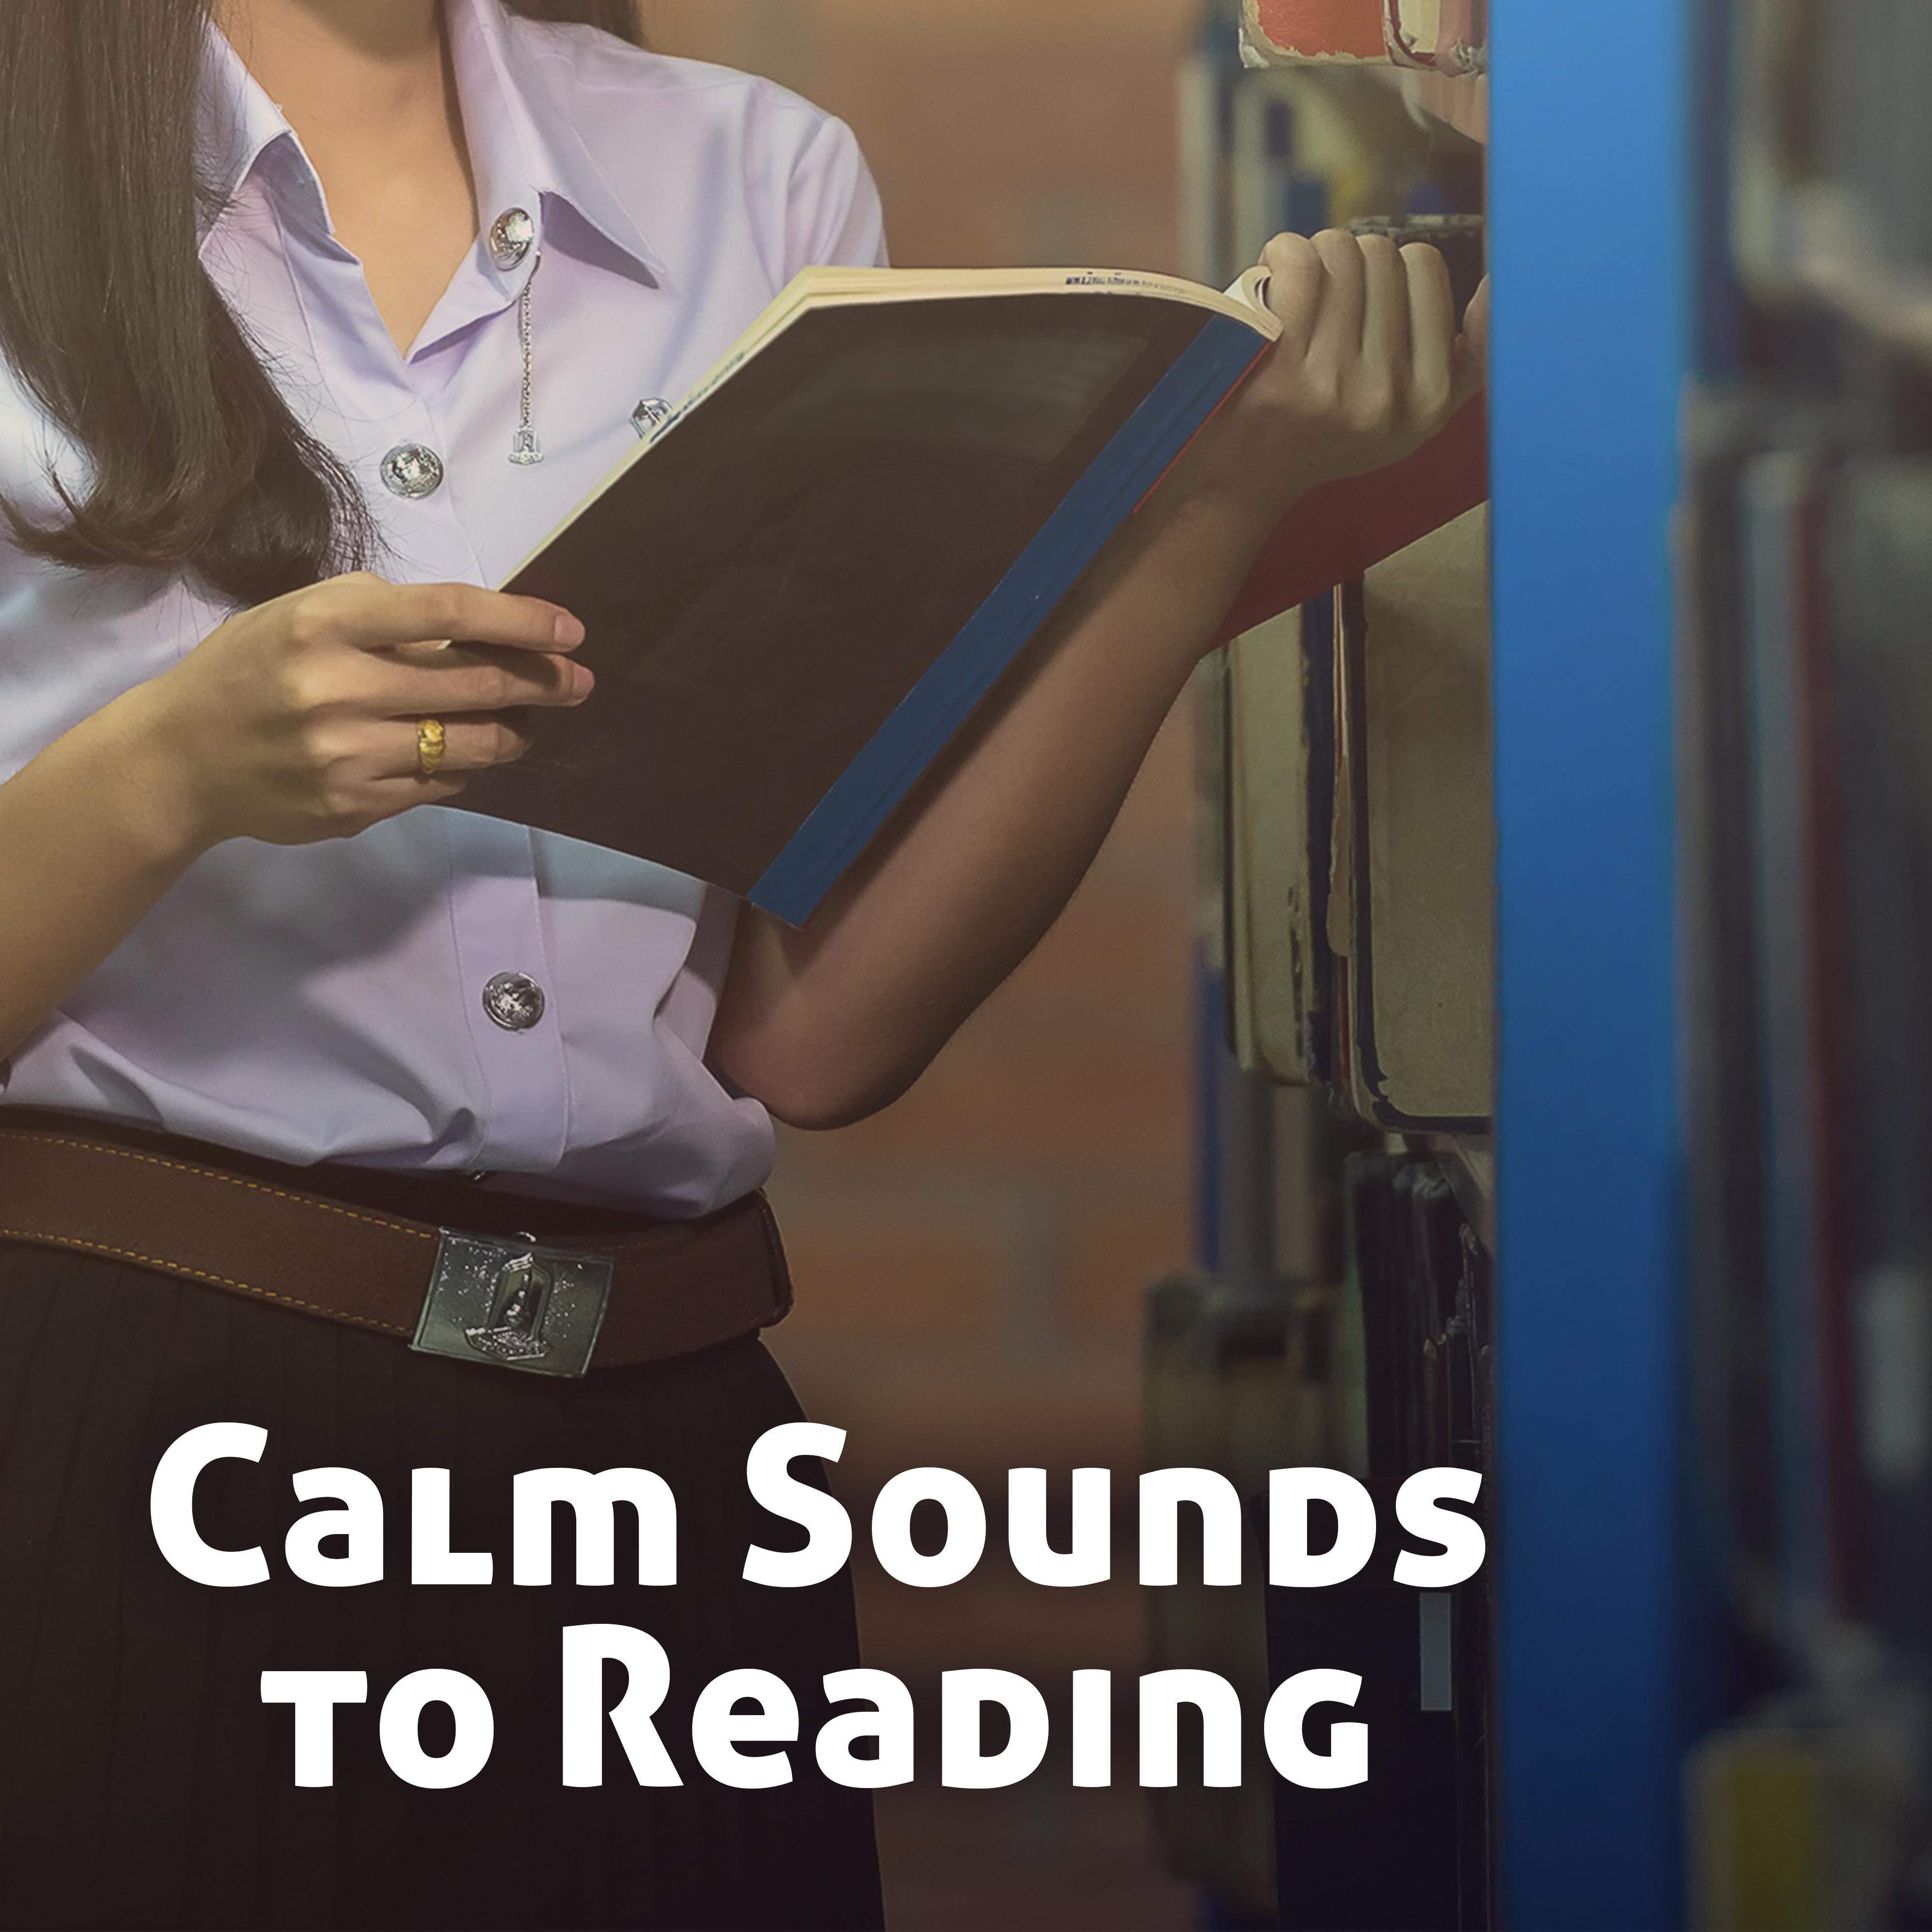 Calm Sounds to Reading  Music to Help Focus, Sounds to Control Mind, Peaceful Waves